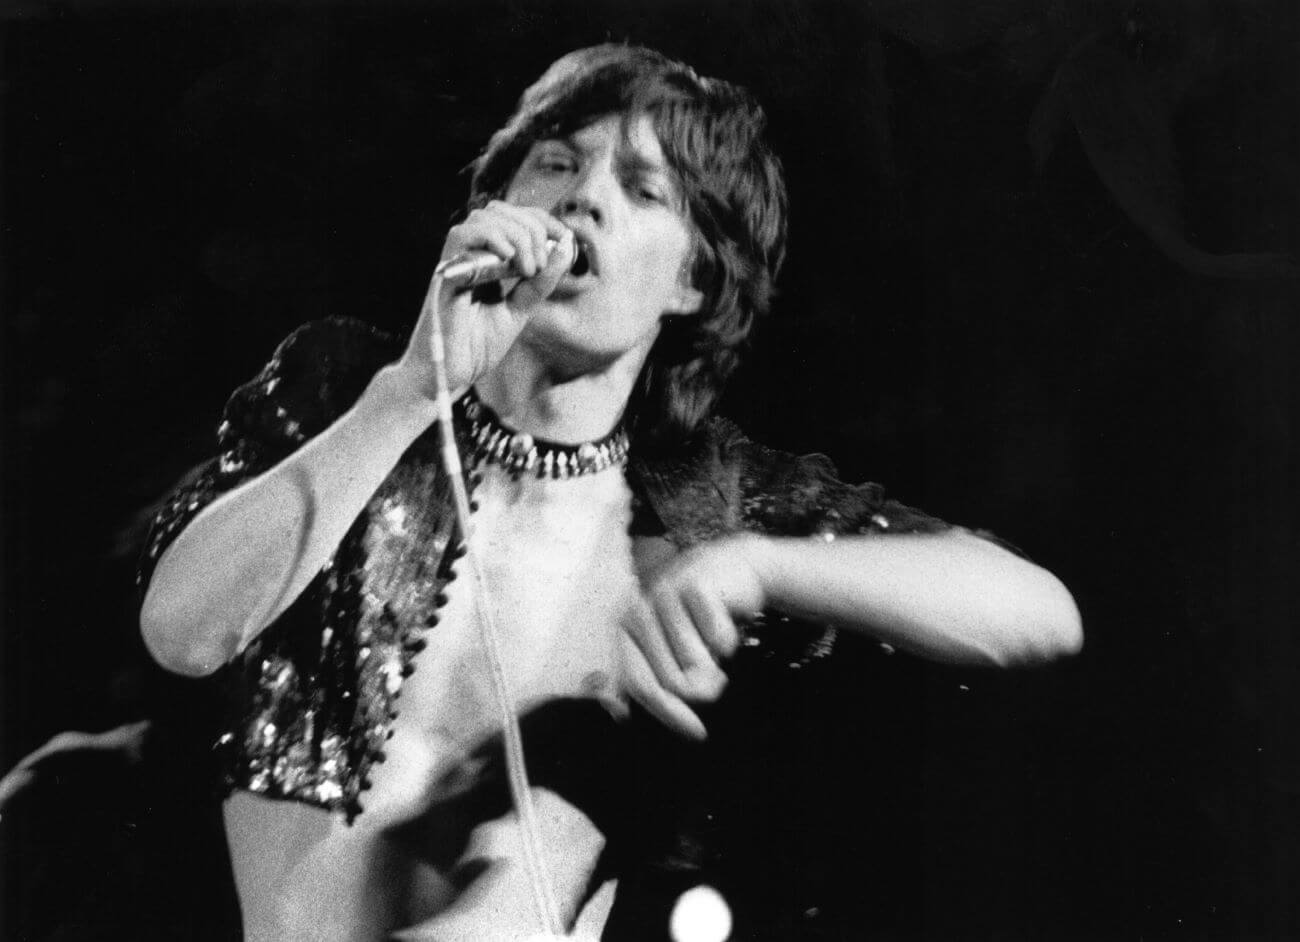 A black and white picture of Mick Jagger singing into a microphone and wearing a sequined shirt.